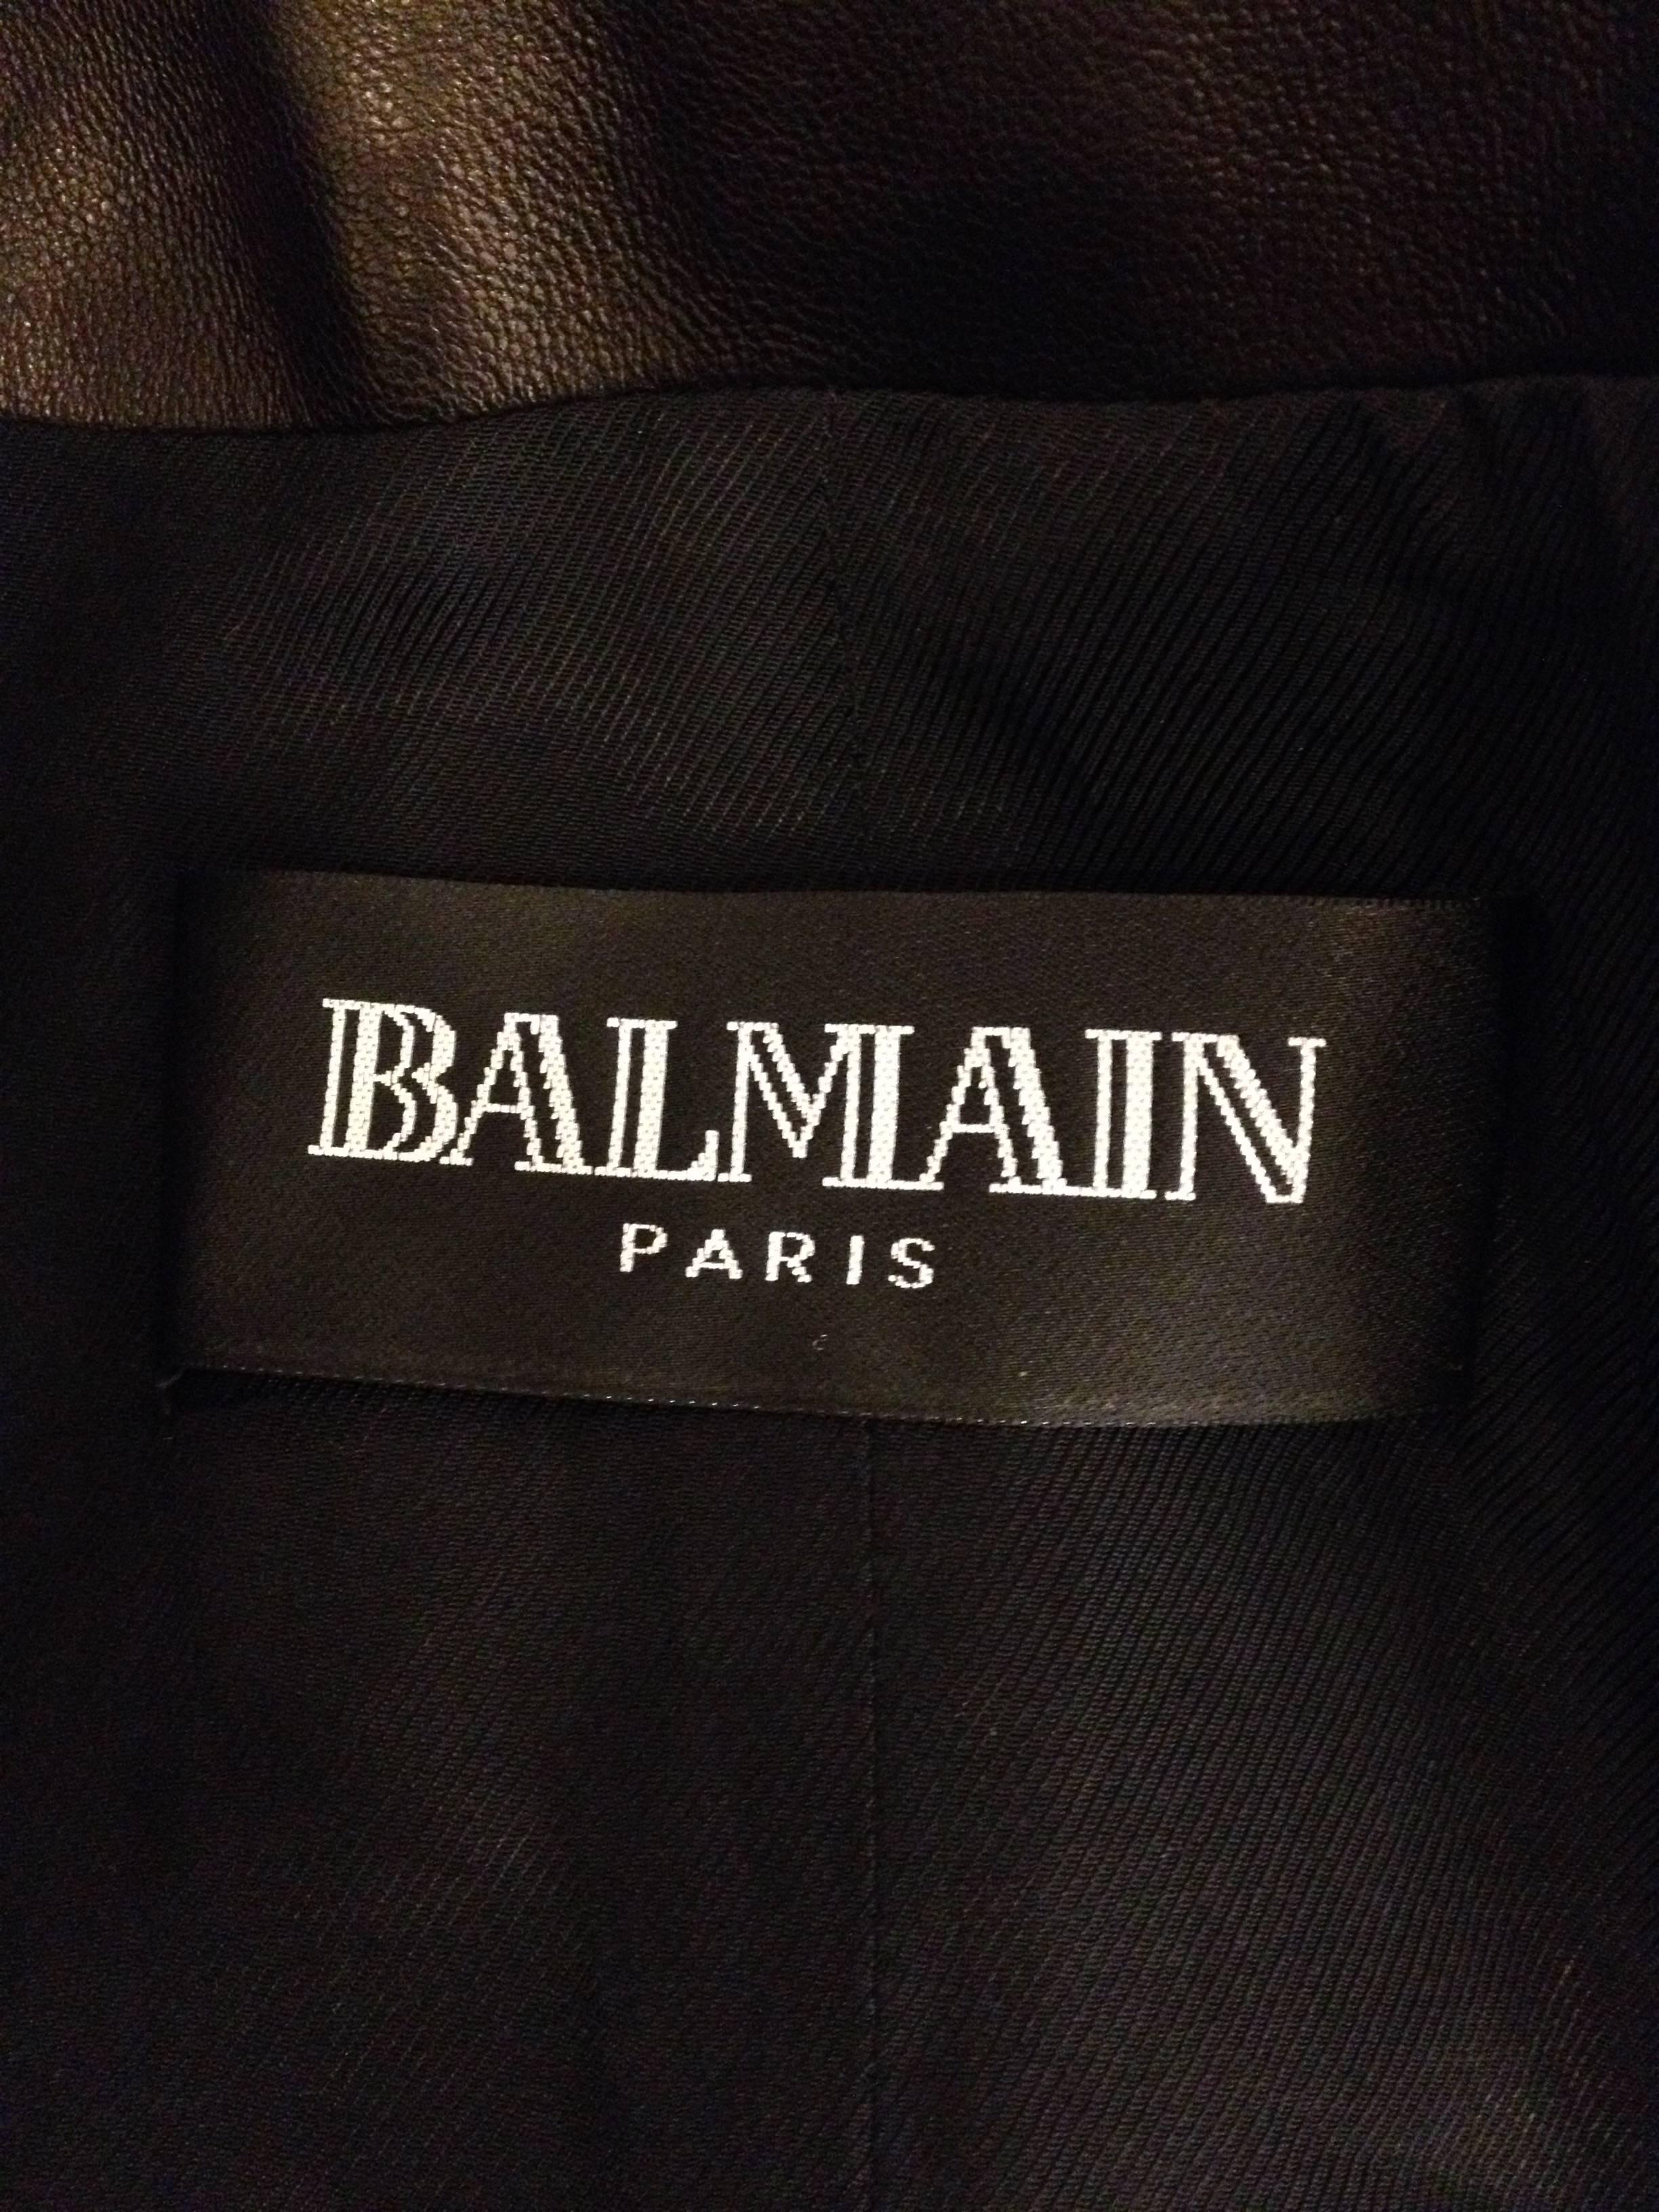 Balmain Black Leather Blazer with Gold Buttons 2